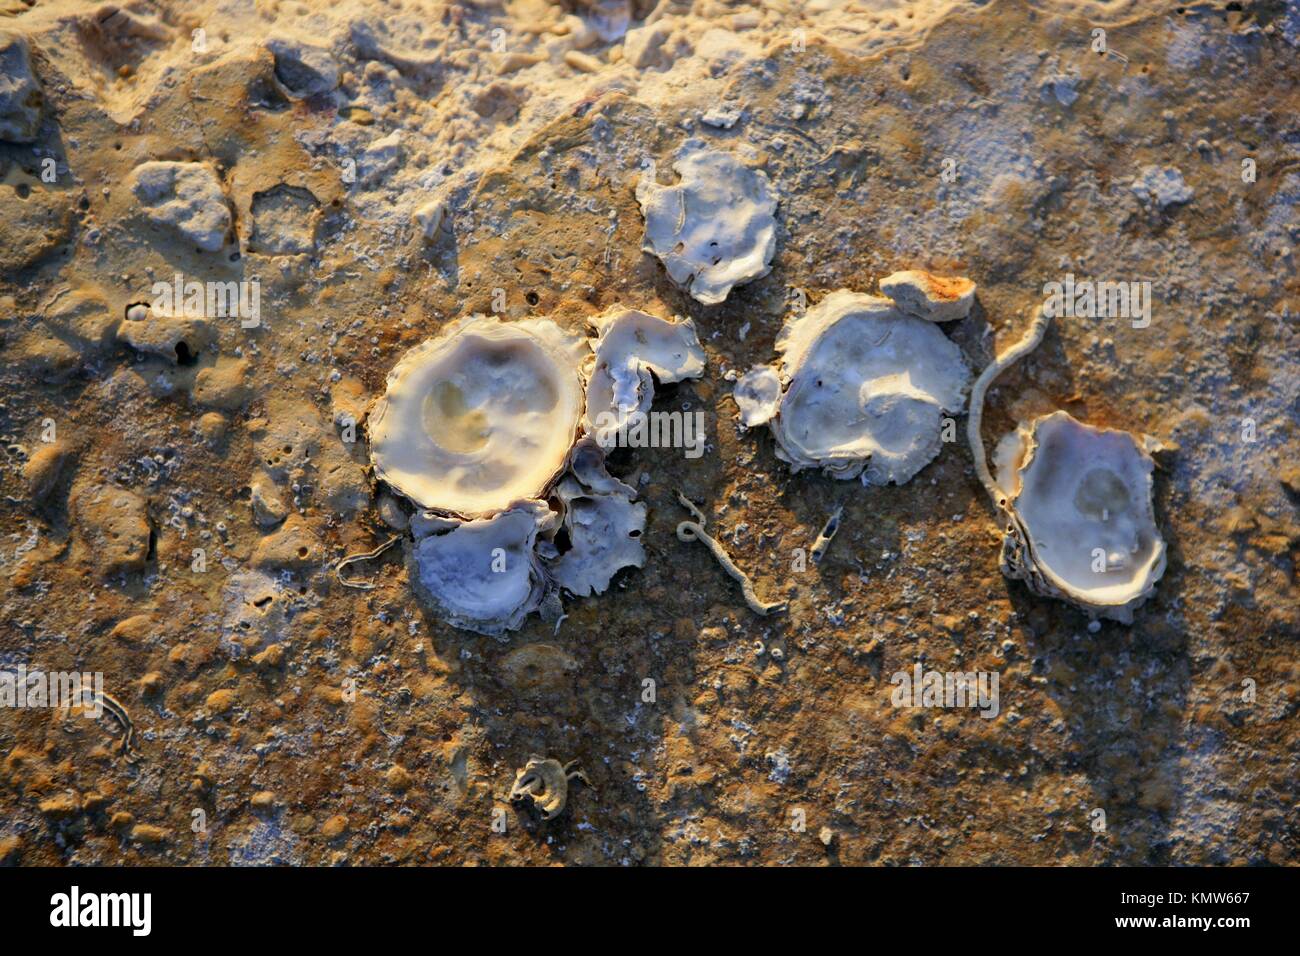 limpet mollusk oyster port coast old rock Stock Photo